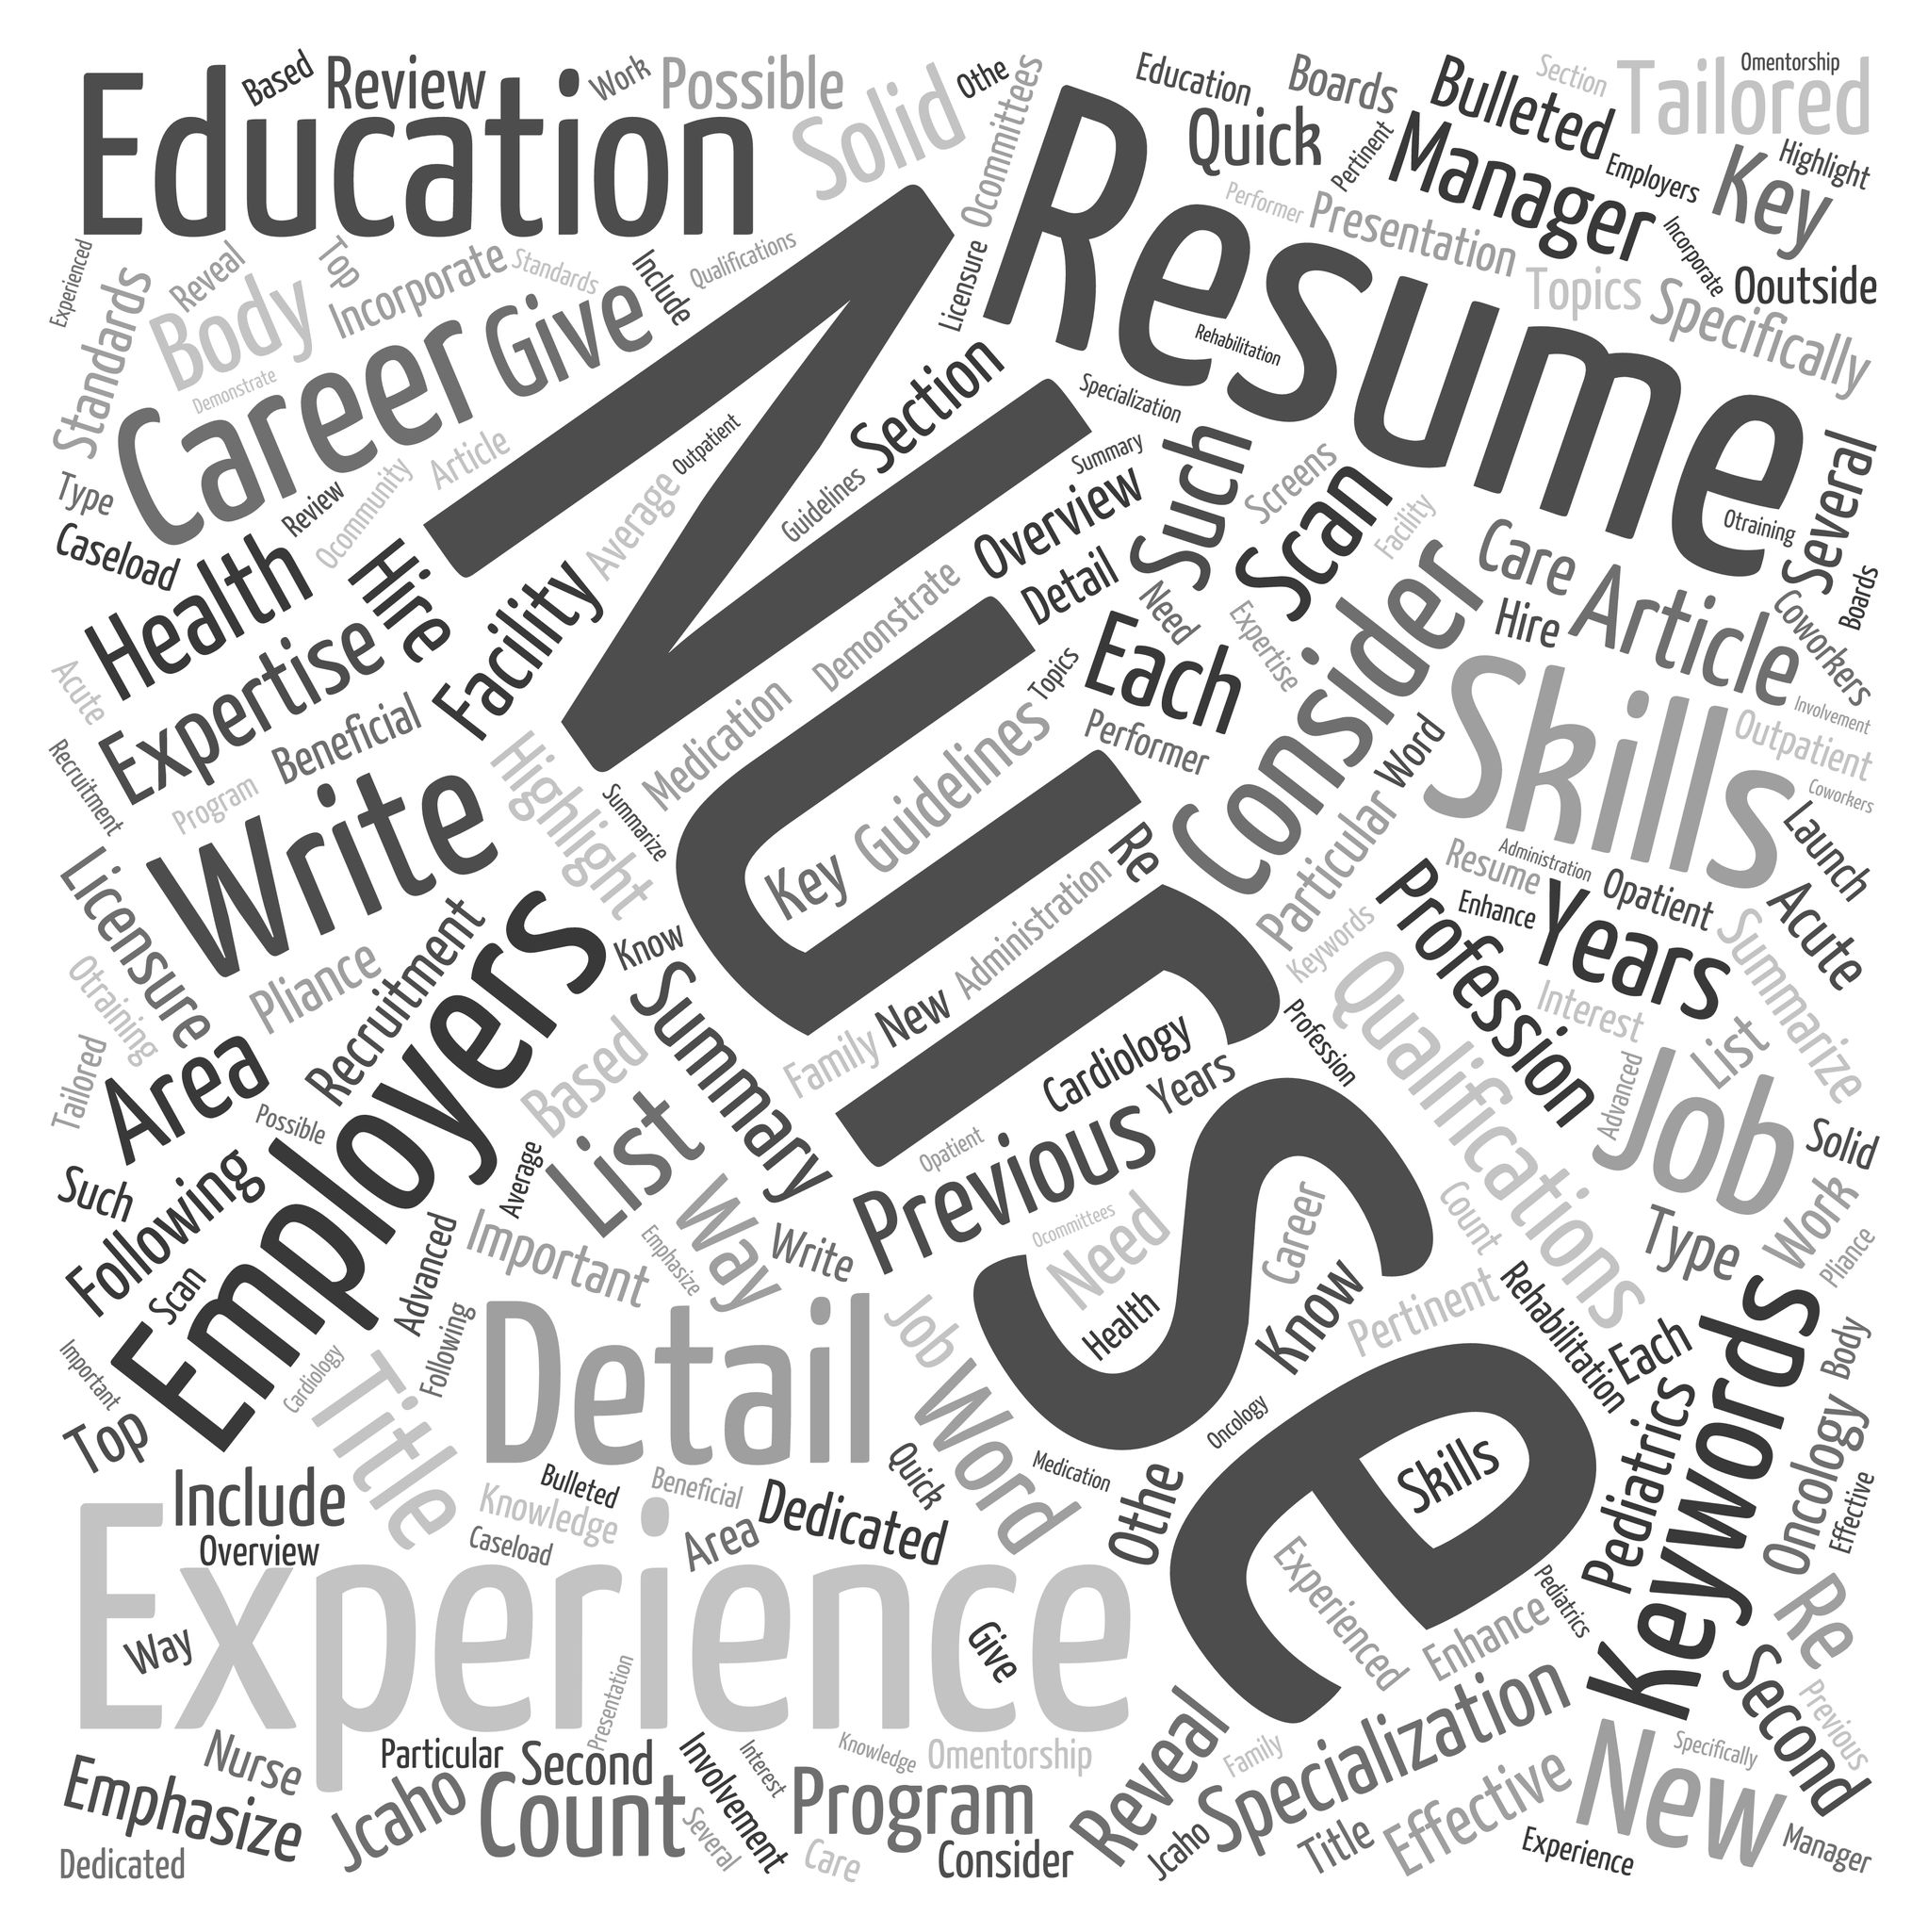 How to Make Your Nursing Resume Relevant in 2015